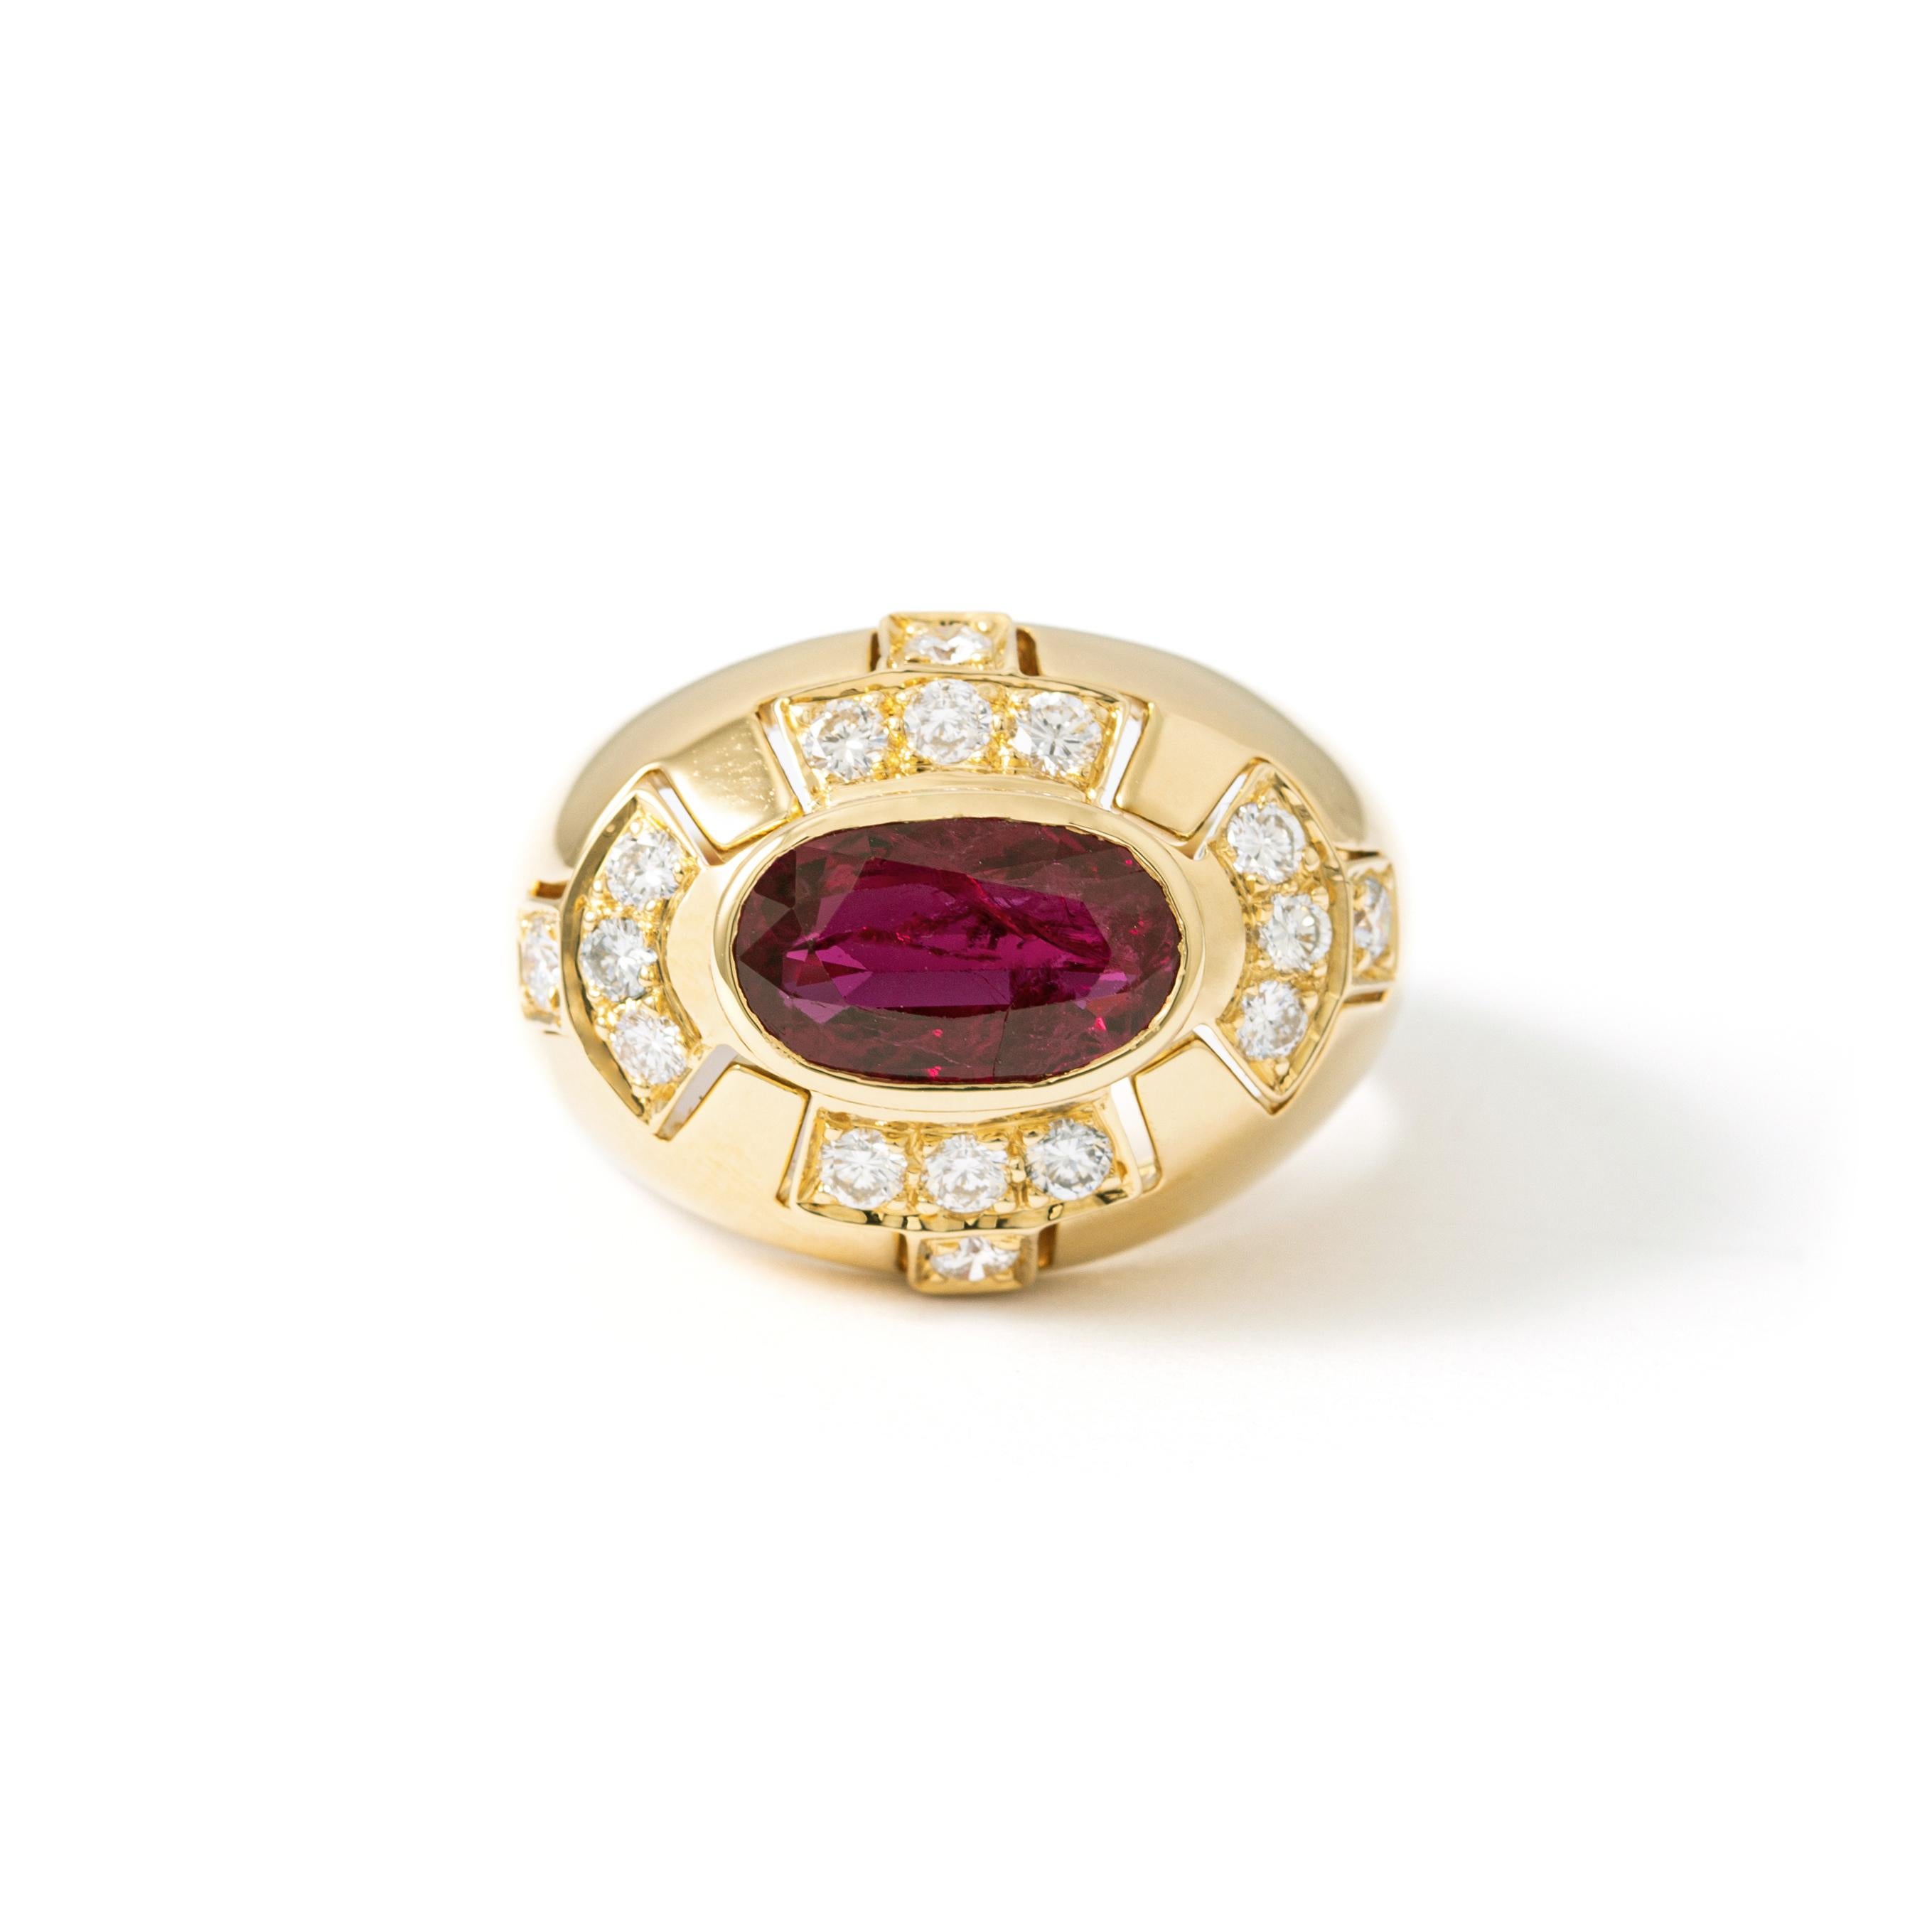 Ring in 18kt yellow gold set with one oval cut ruby 3.41 cts and diamonds 1.07 cts Size 53